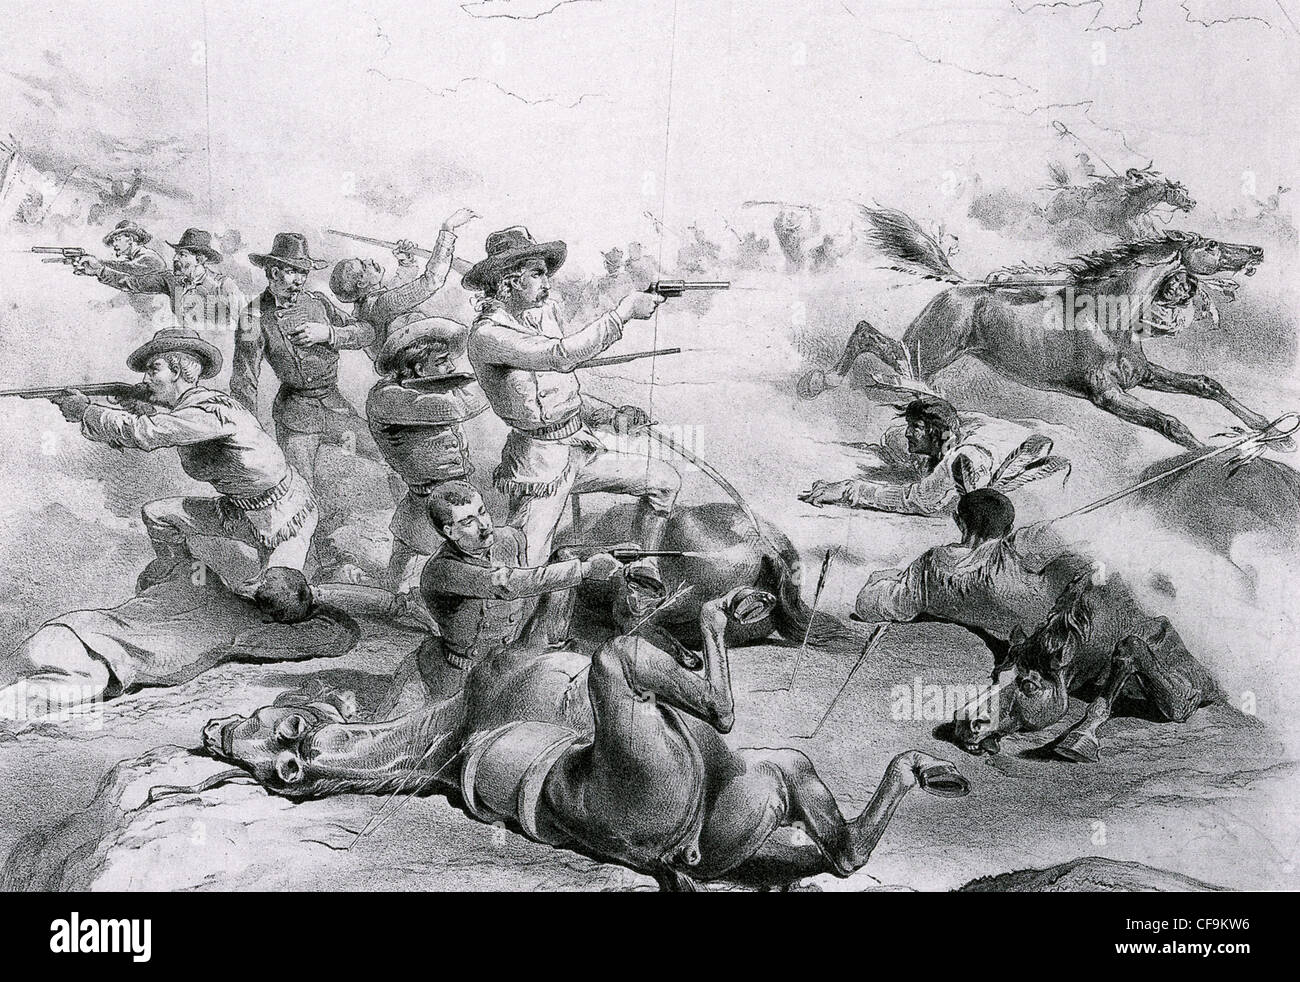 BATTLE OF THE LITTLE BIGHORN Near contemporary illustration of  Custer's last stand on 26 June 1876 Stock Photo